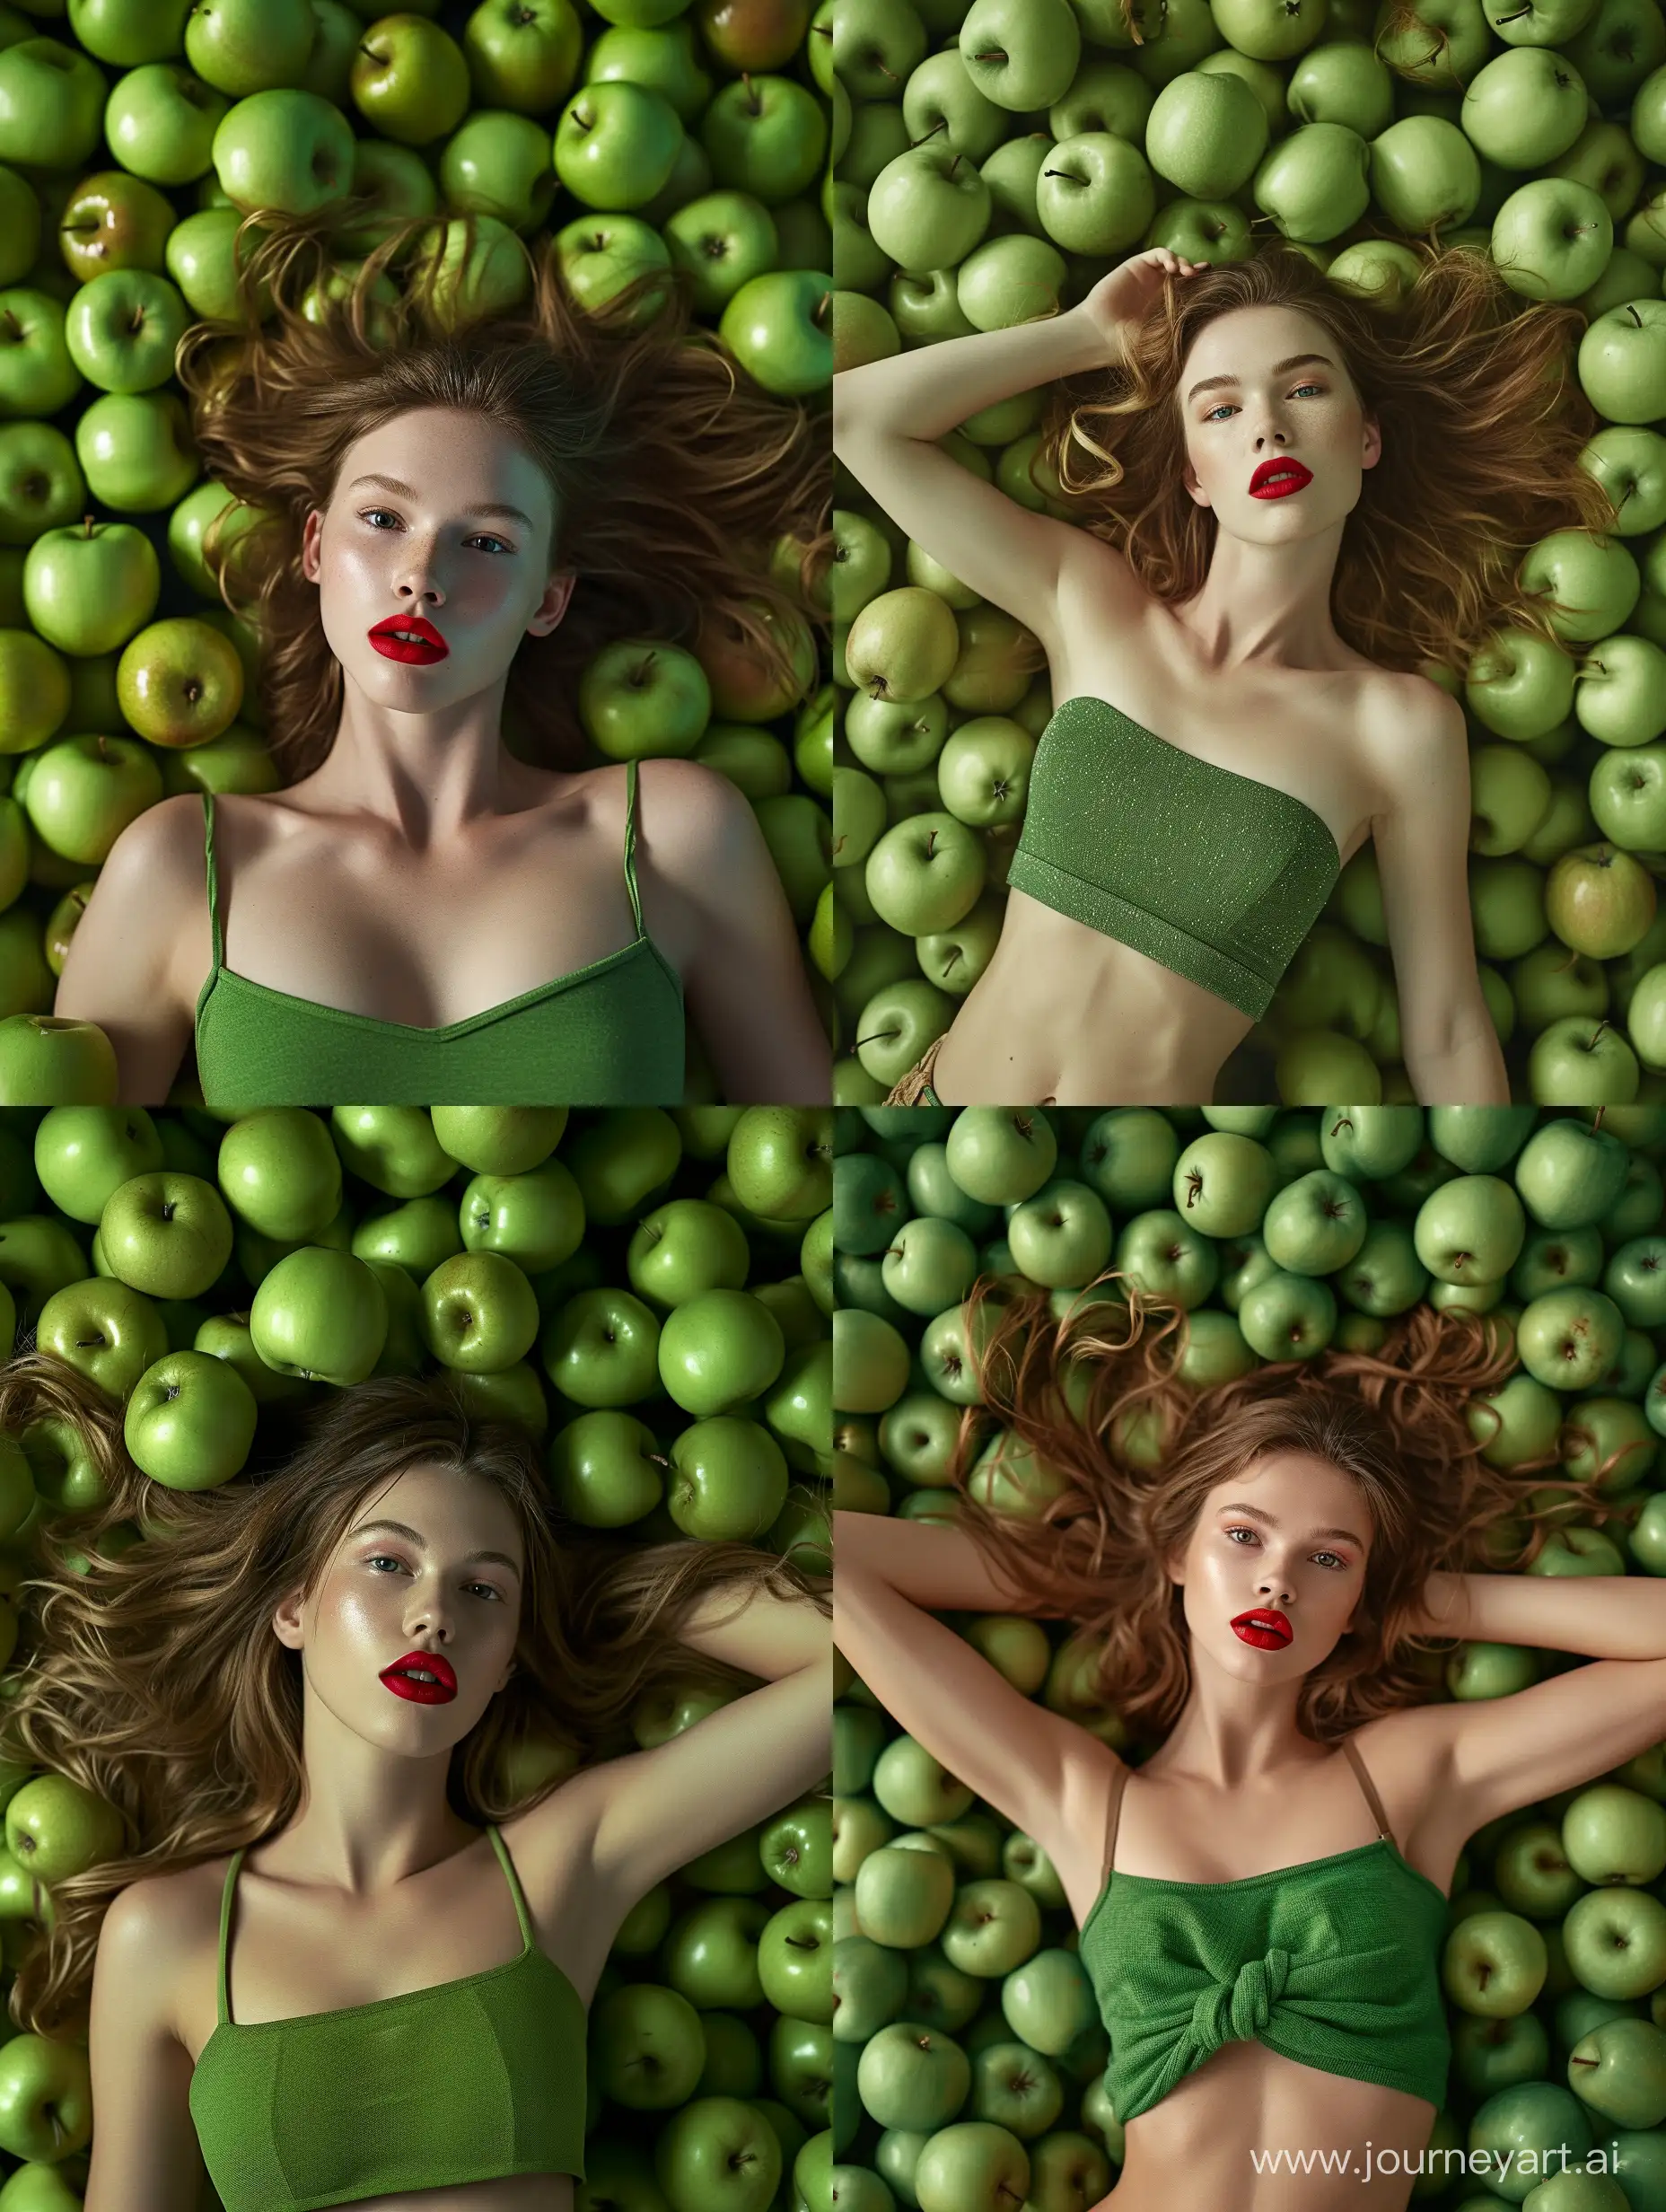 Fashionable-Female-Model-in-Apple-Green-Crop-Top-Amidst-a-Sea-of-Green-Apples